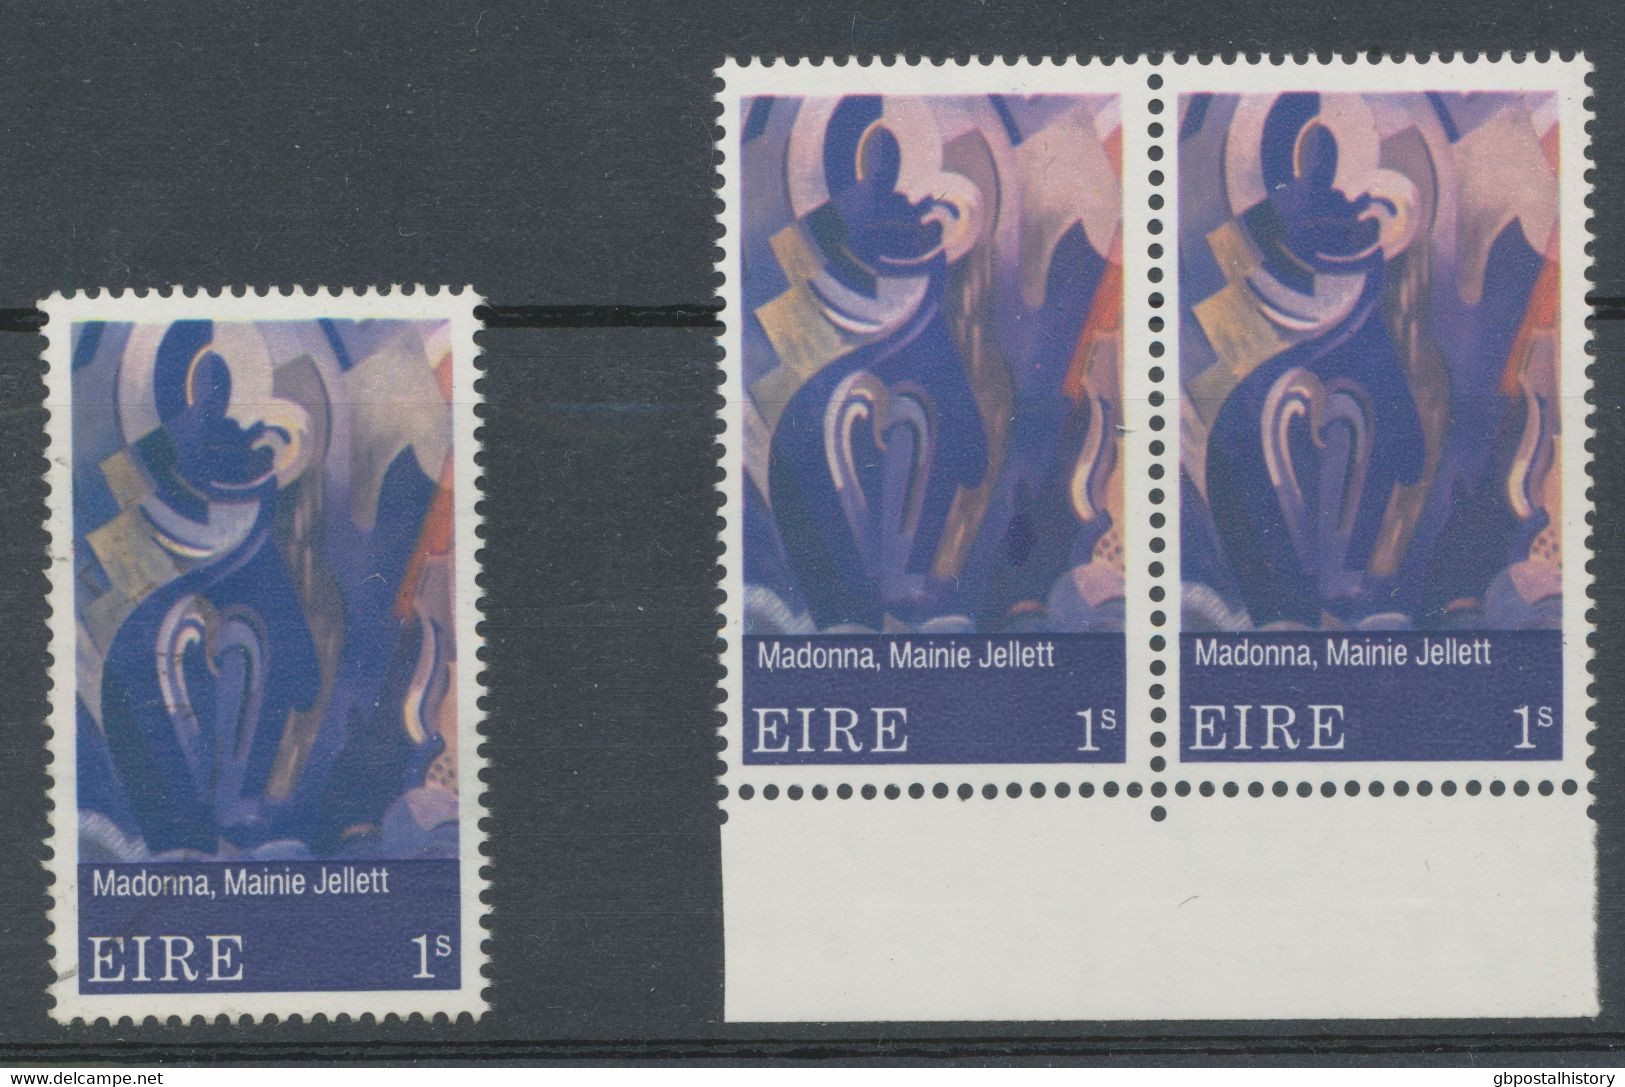 IRELAND 1970 Contemporary Irish Art 1S Superb Used MAJOR VARIETY COLOR PINK On The Left Stamp Is Almost Complete MISSING - Used Stamps